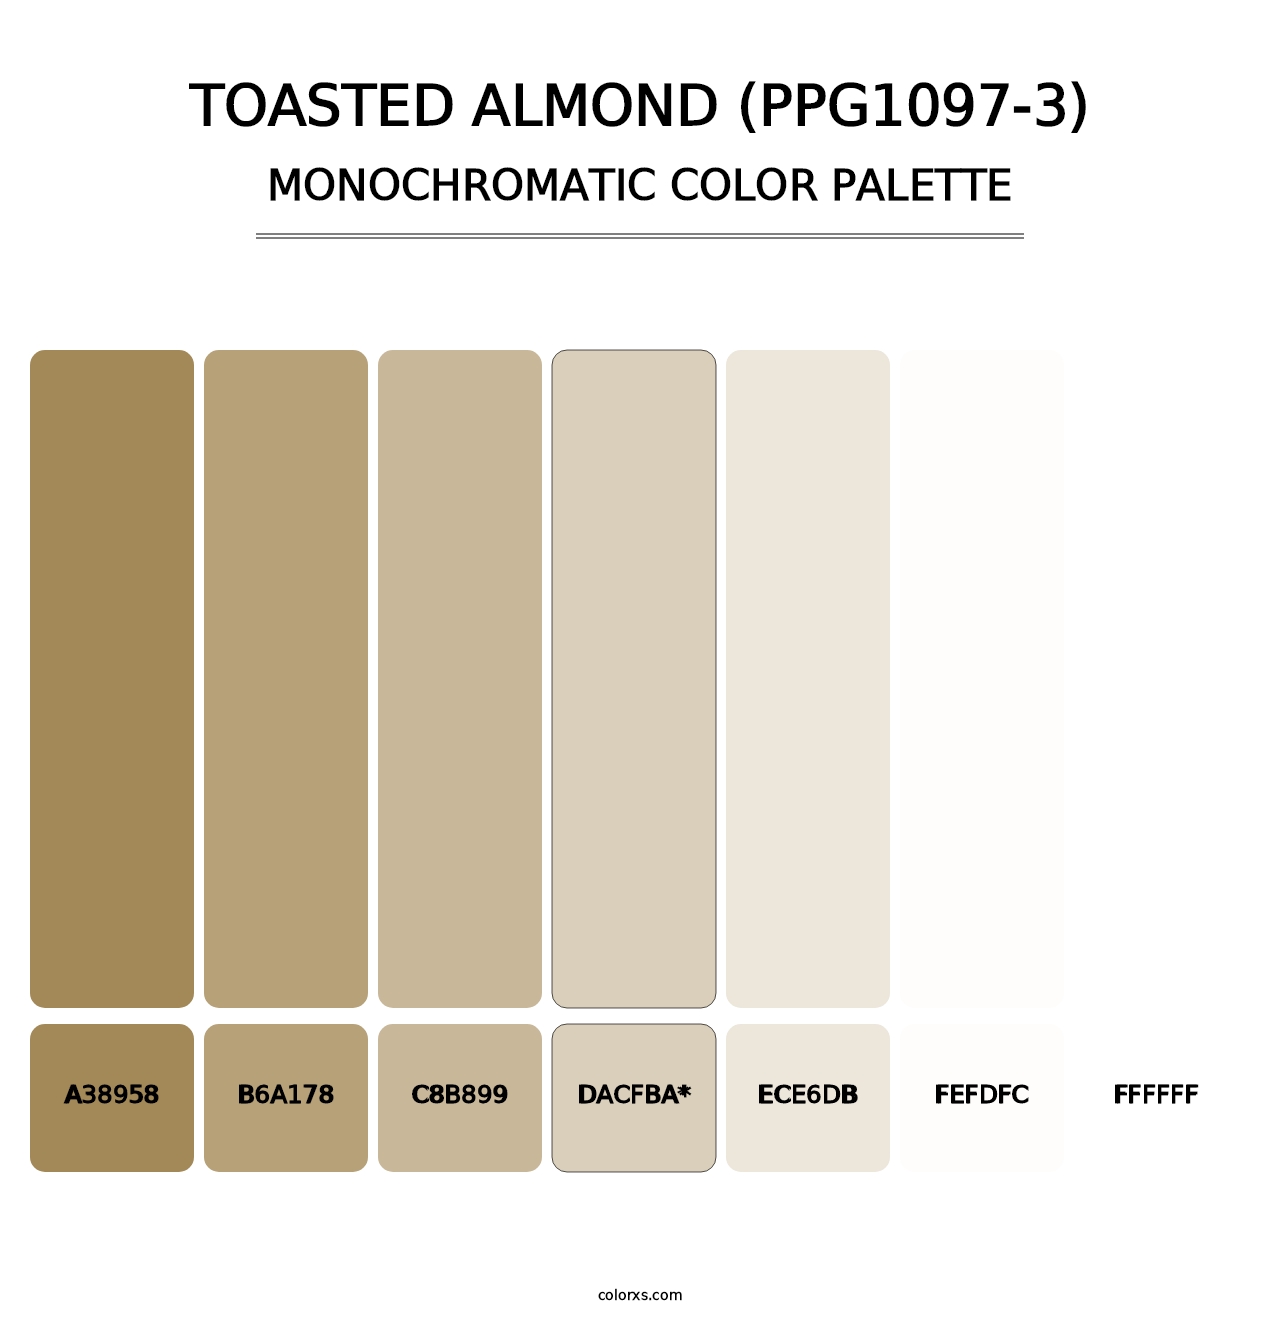 Toasted Almond (PPG1097-3) - Monochromatic Color Palette